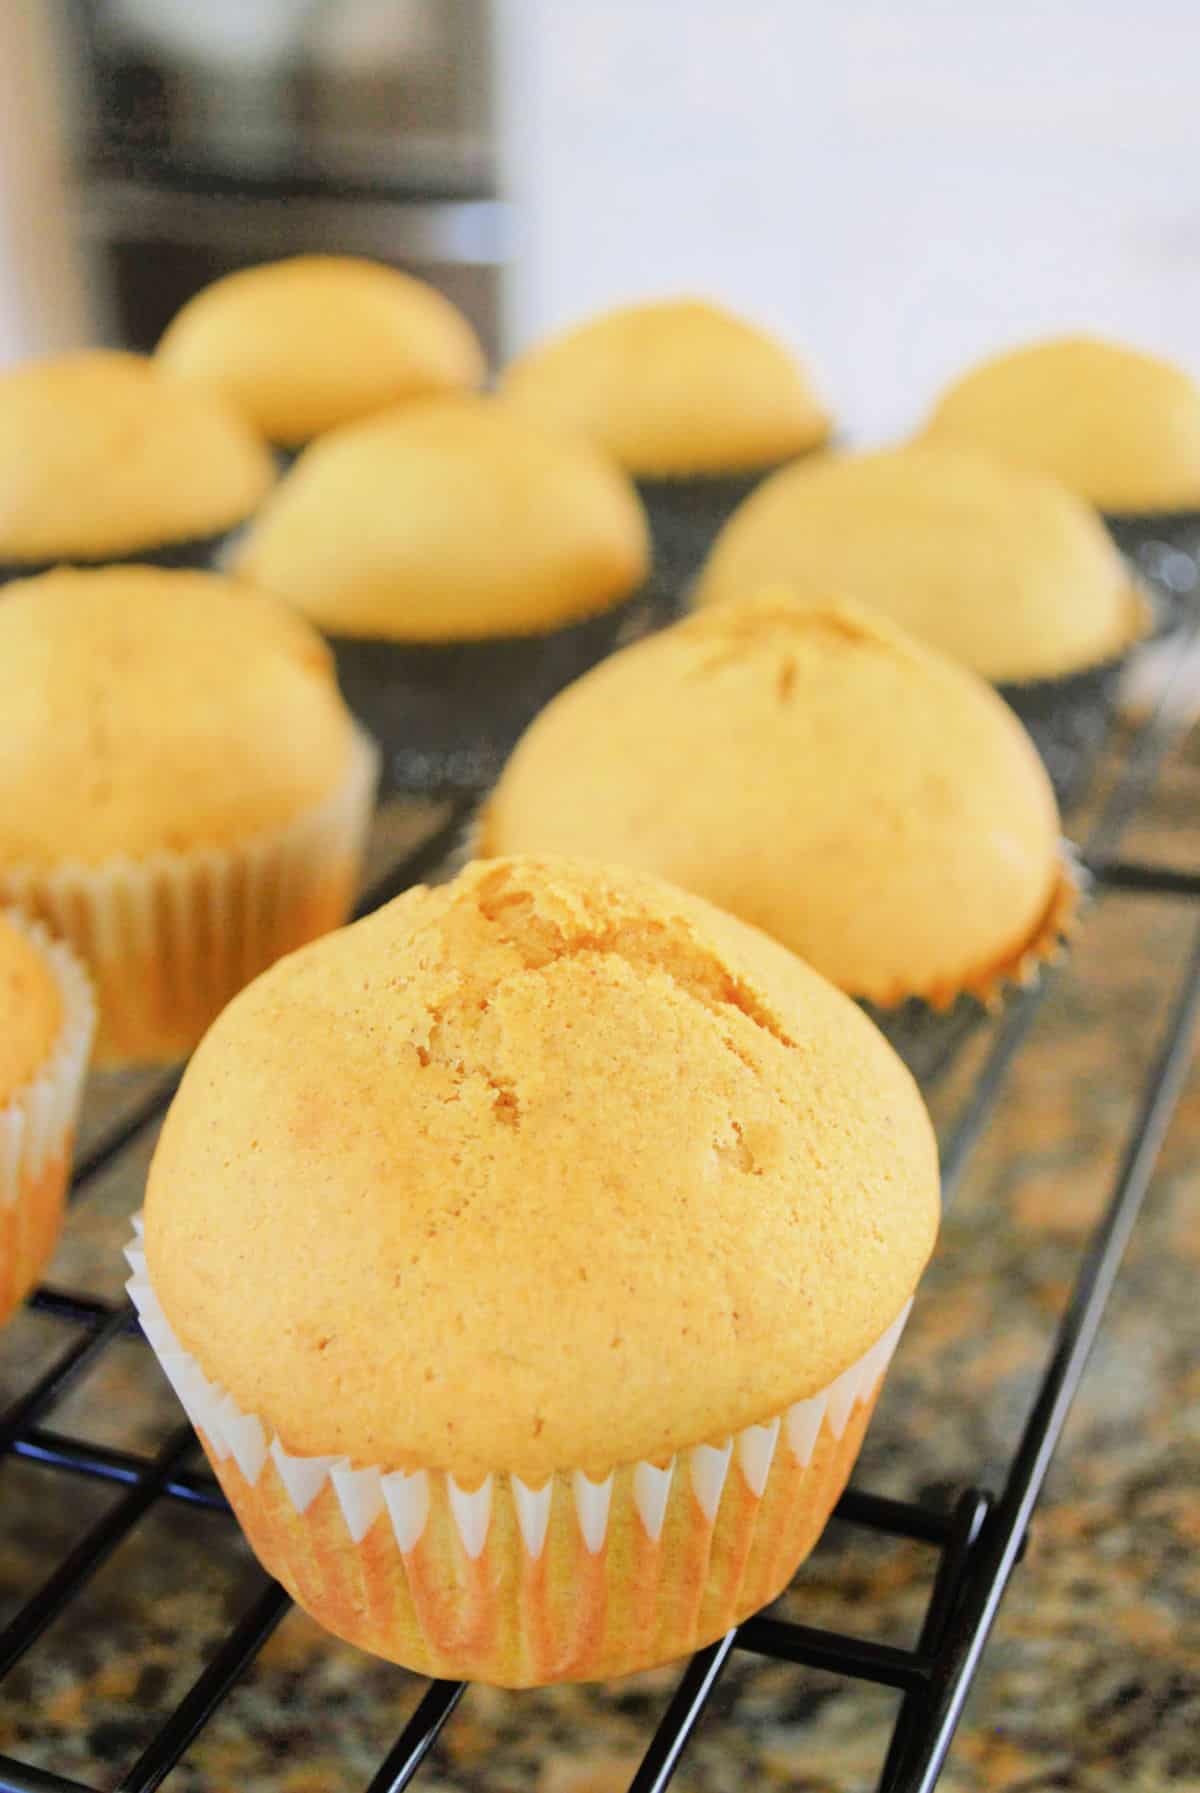 Carrot Muffin Recipe for Kids - try these on your picky eater who won't eat vegetables.